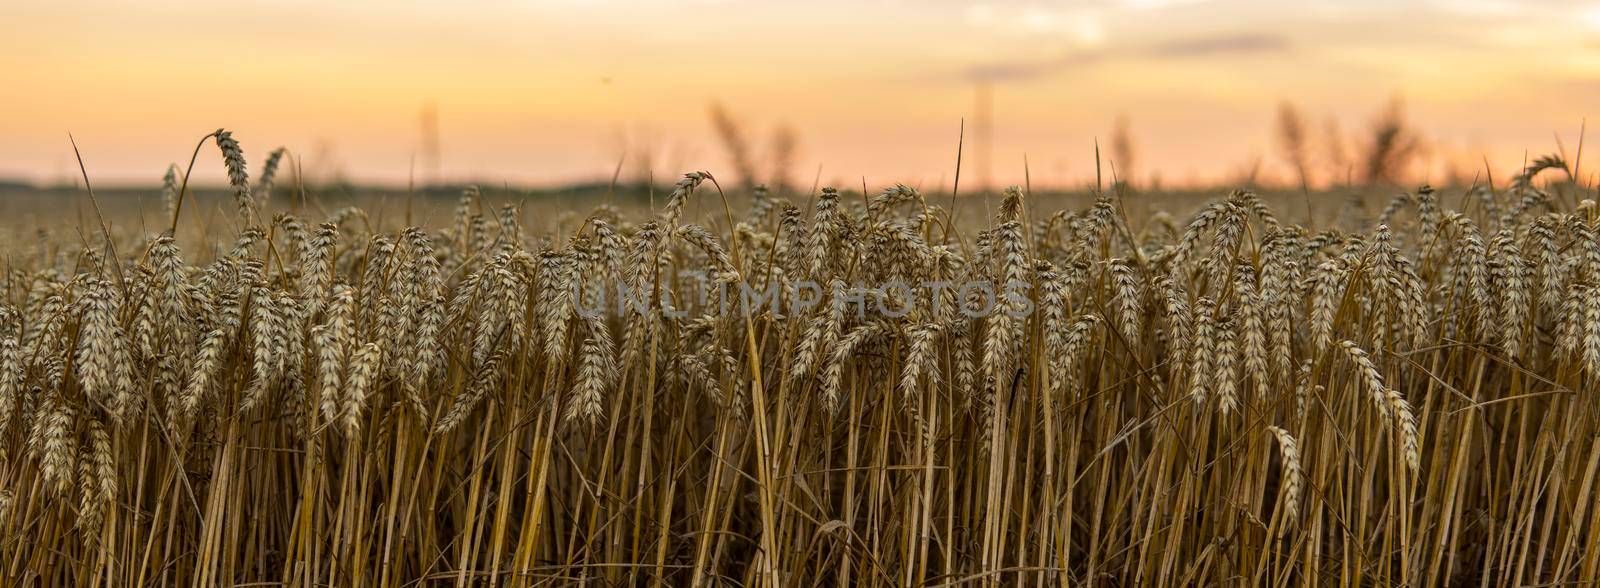 Golden wheat field in Ukraine. Ears of ripe yellow wheat against a bright sunset sky